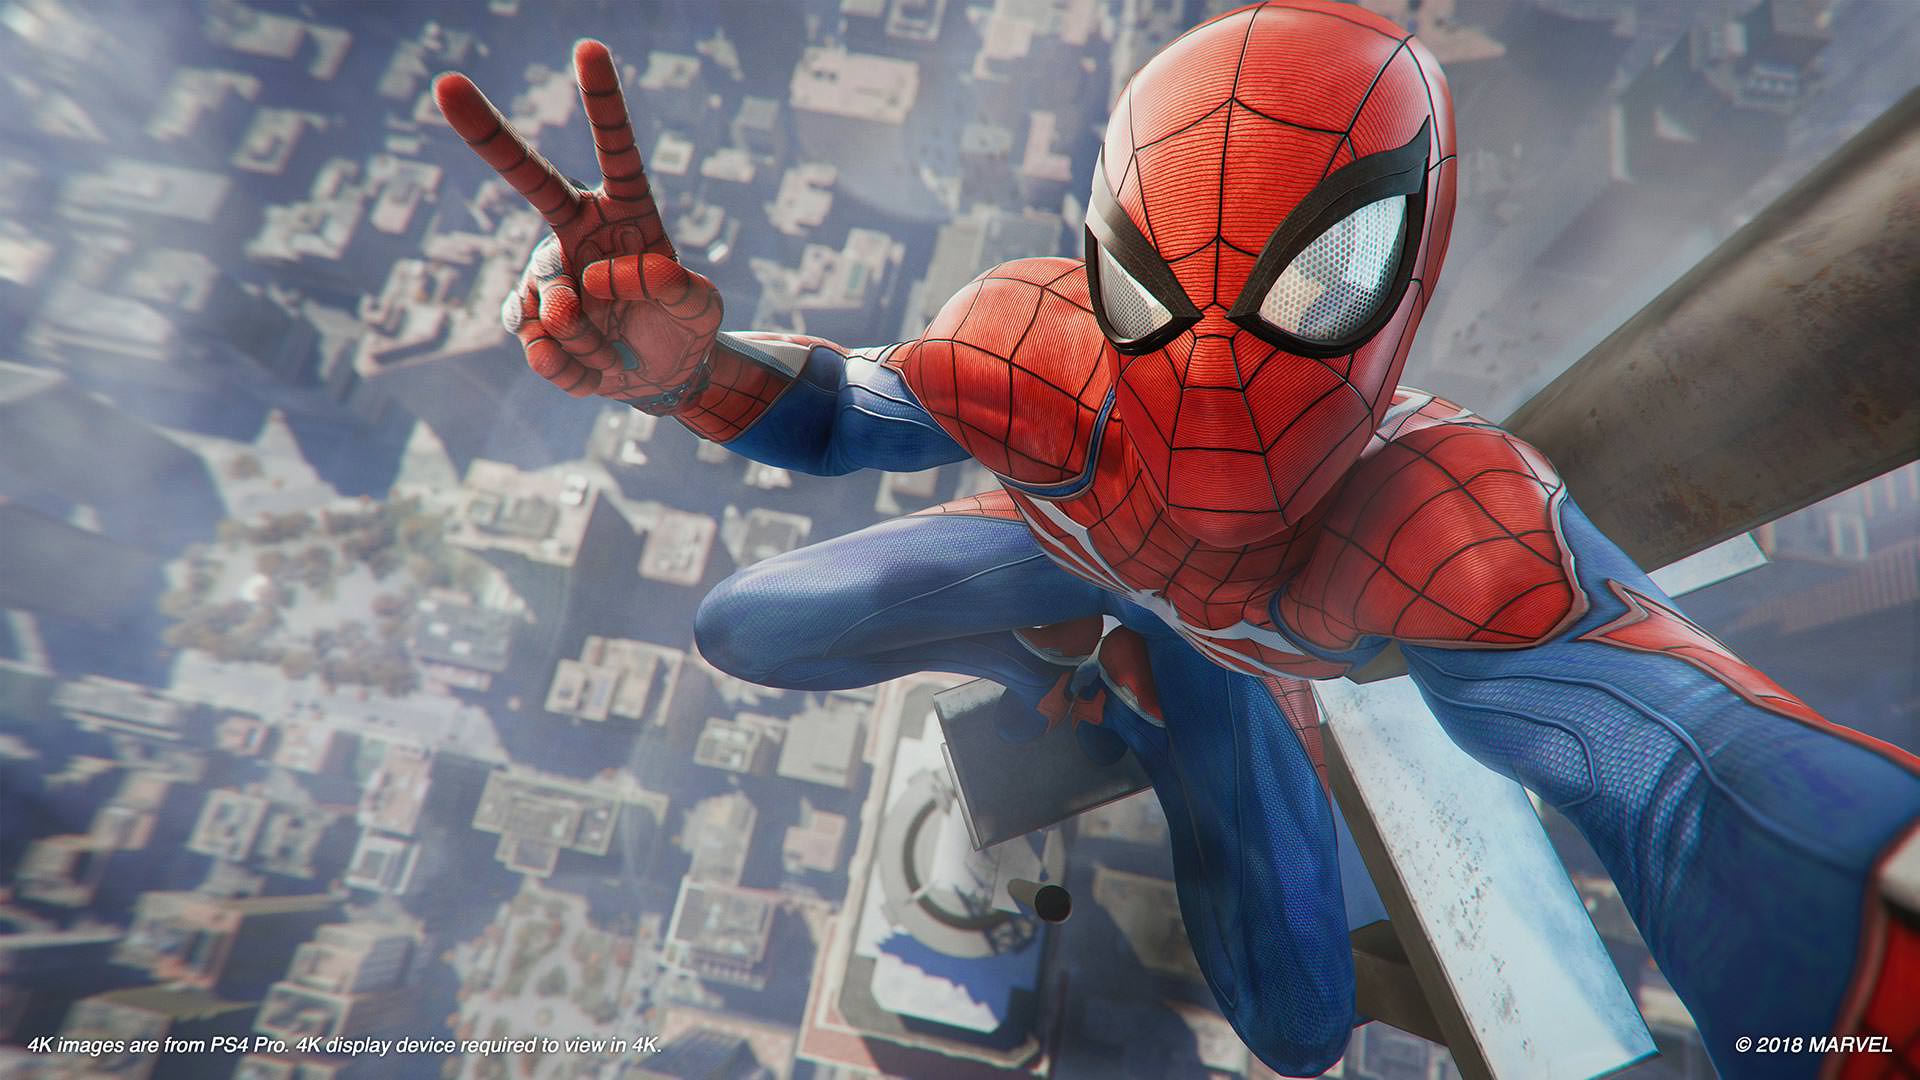 Rumor: Marvel's Spider Man 2 May Release On PS5 In 2021